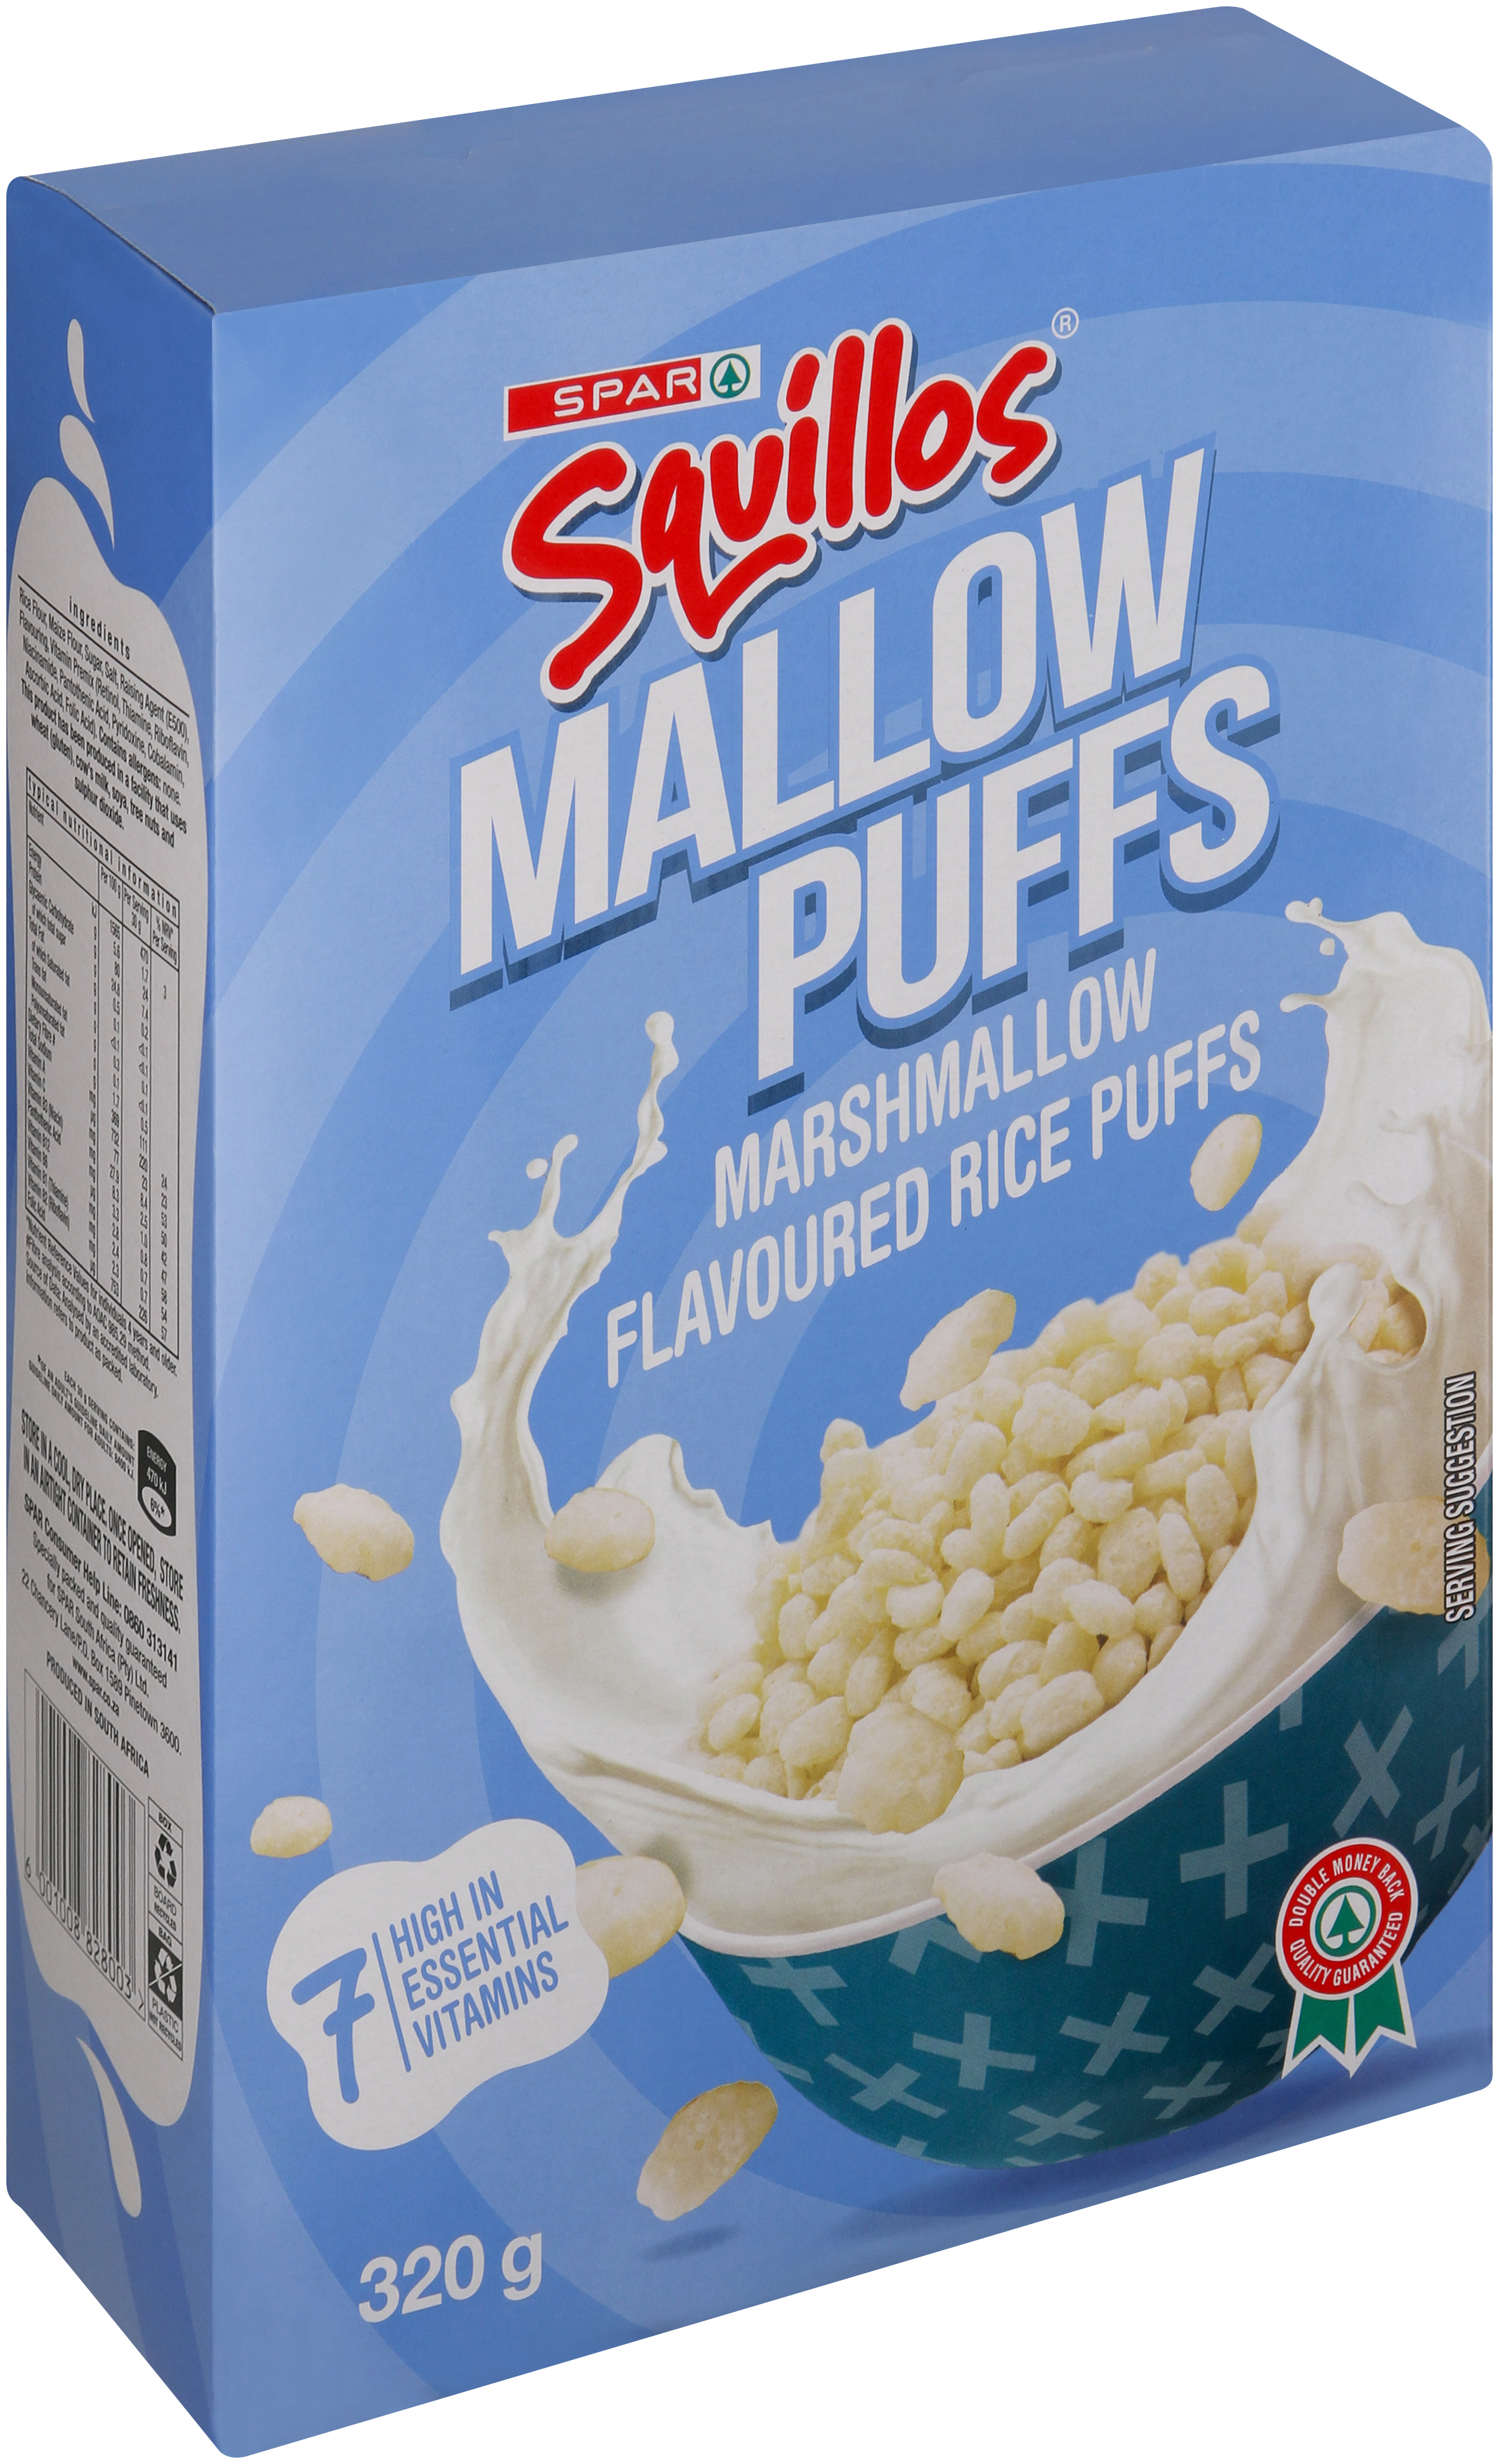 squillos puffs marshmallow